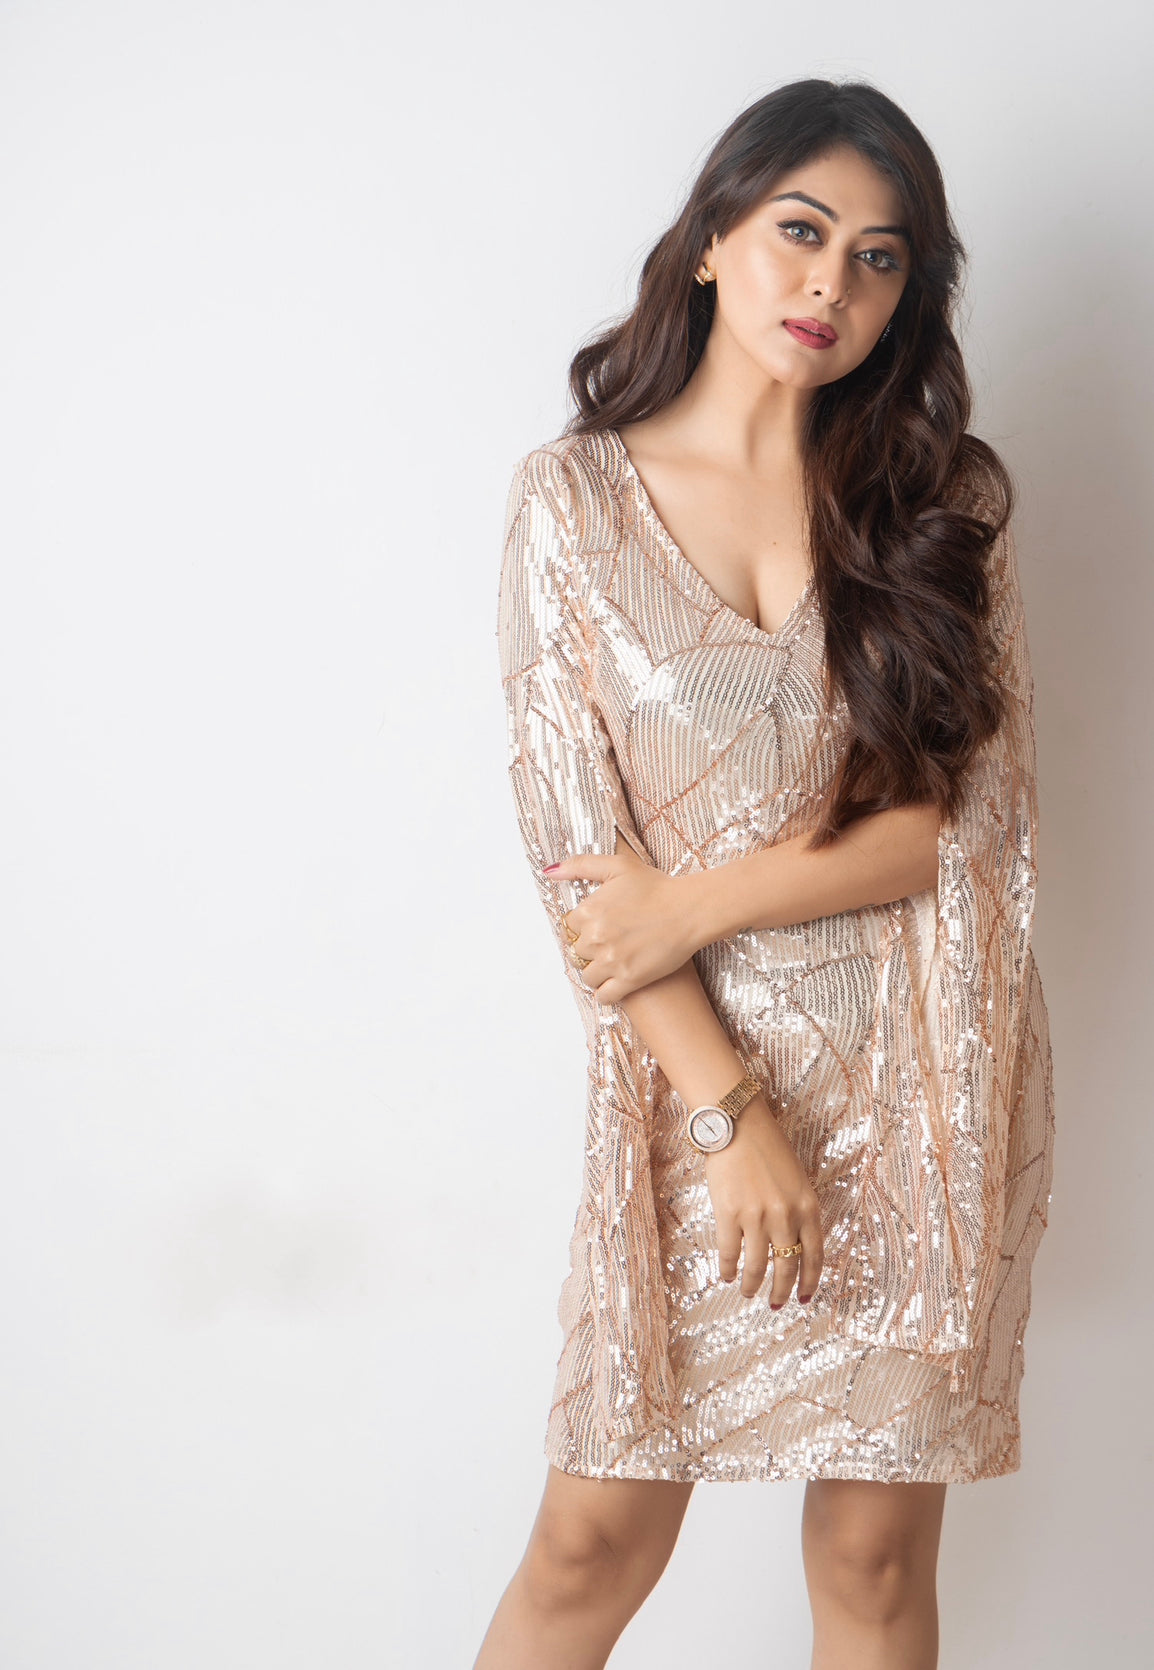 Falaq Naaz In Our Holly Sequin Dress